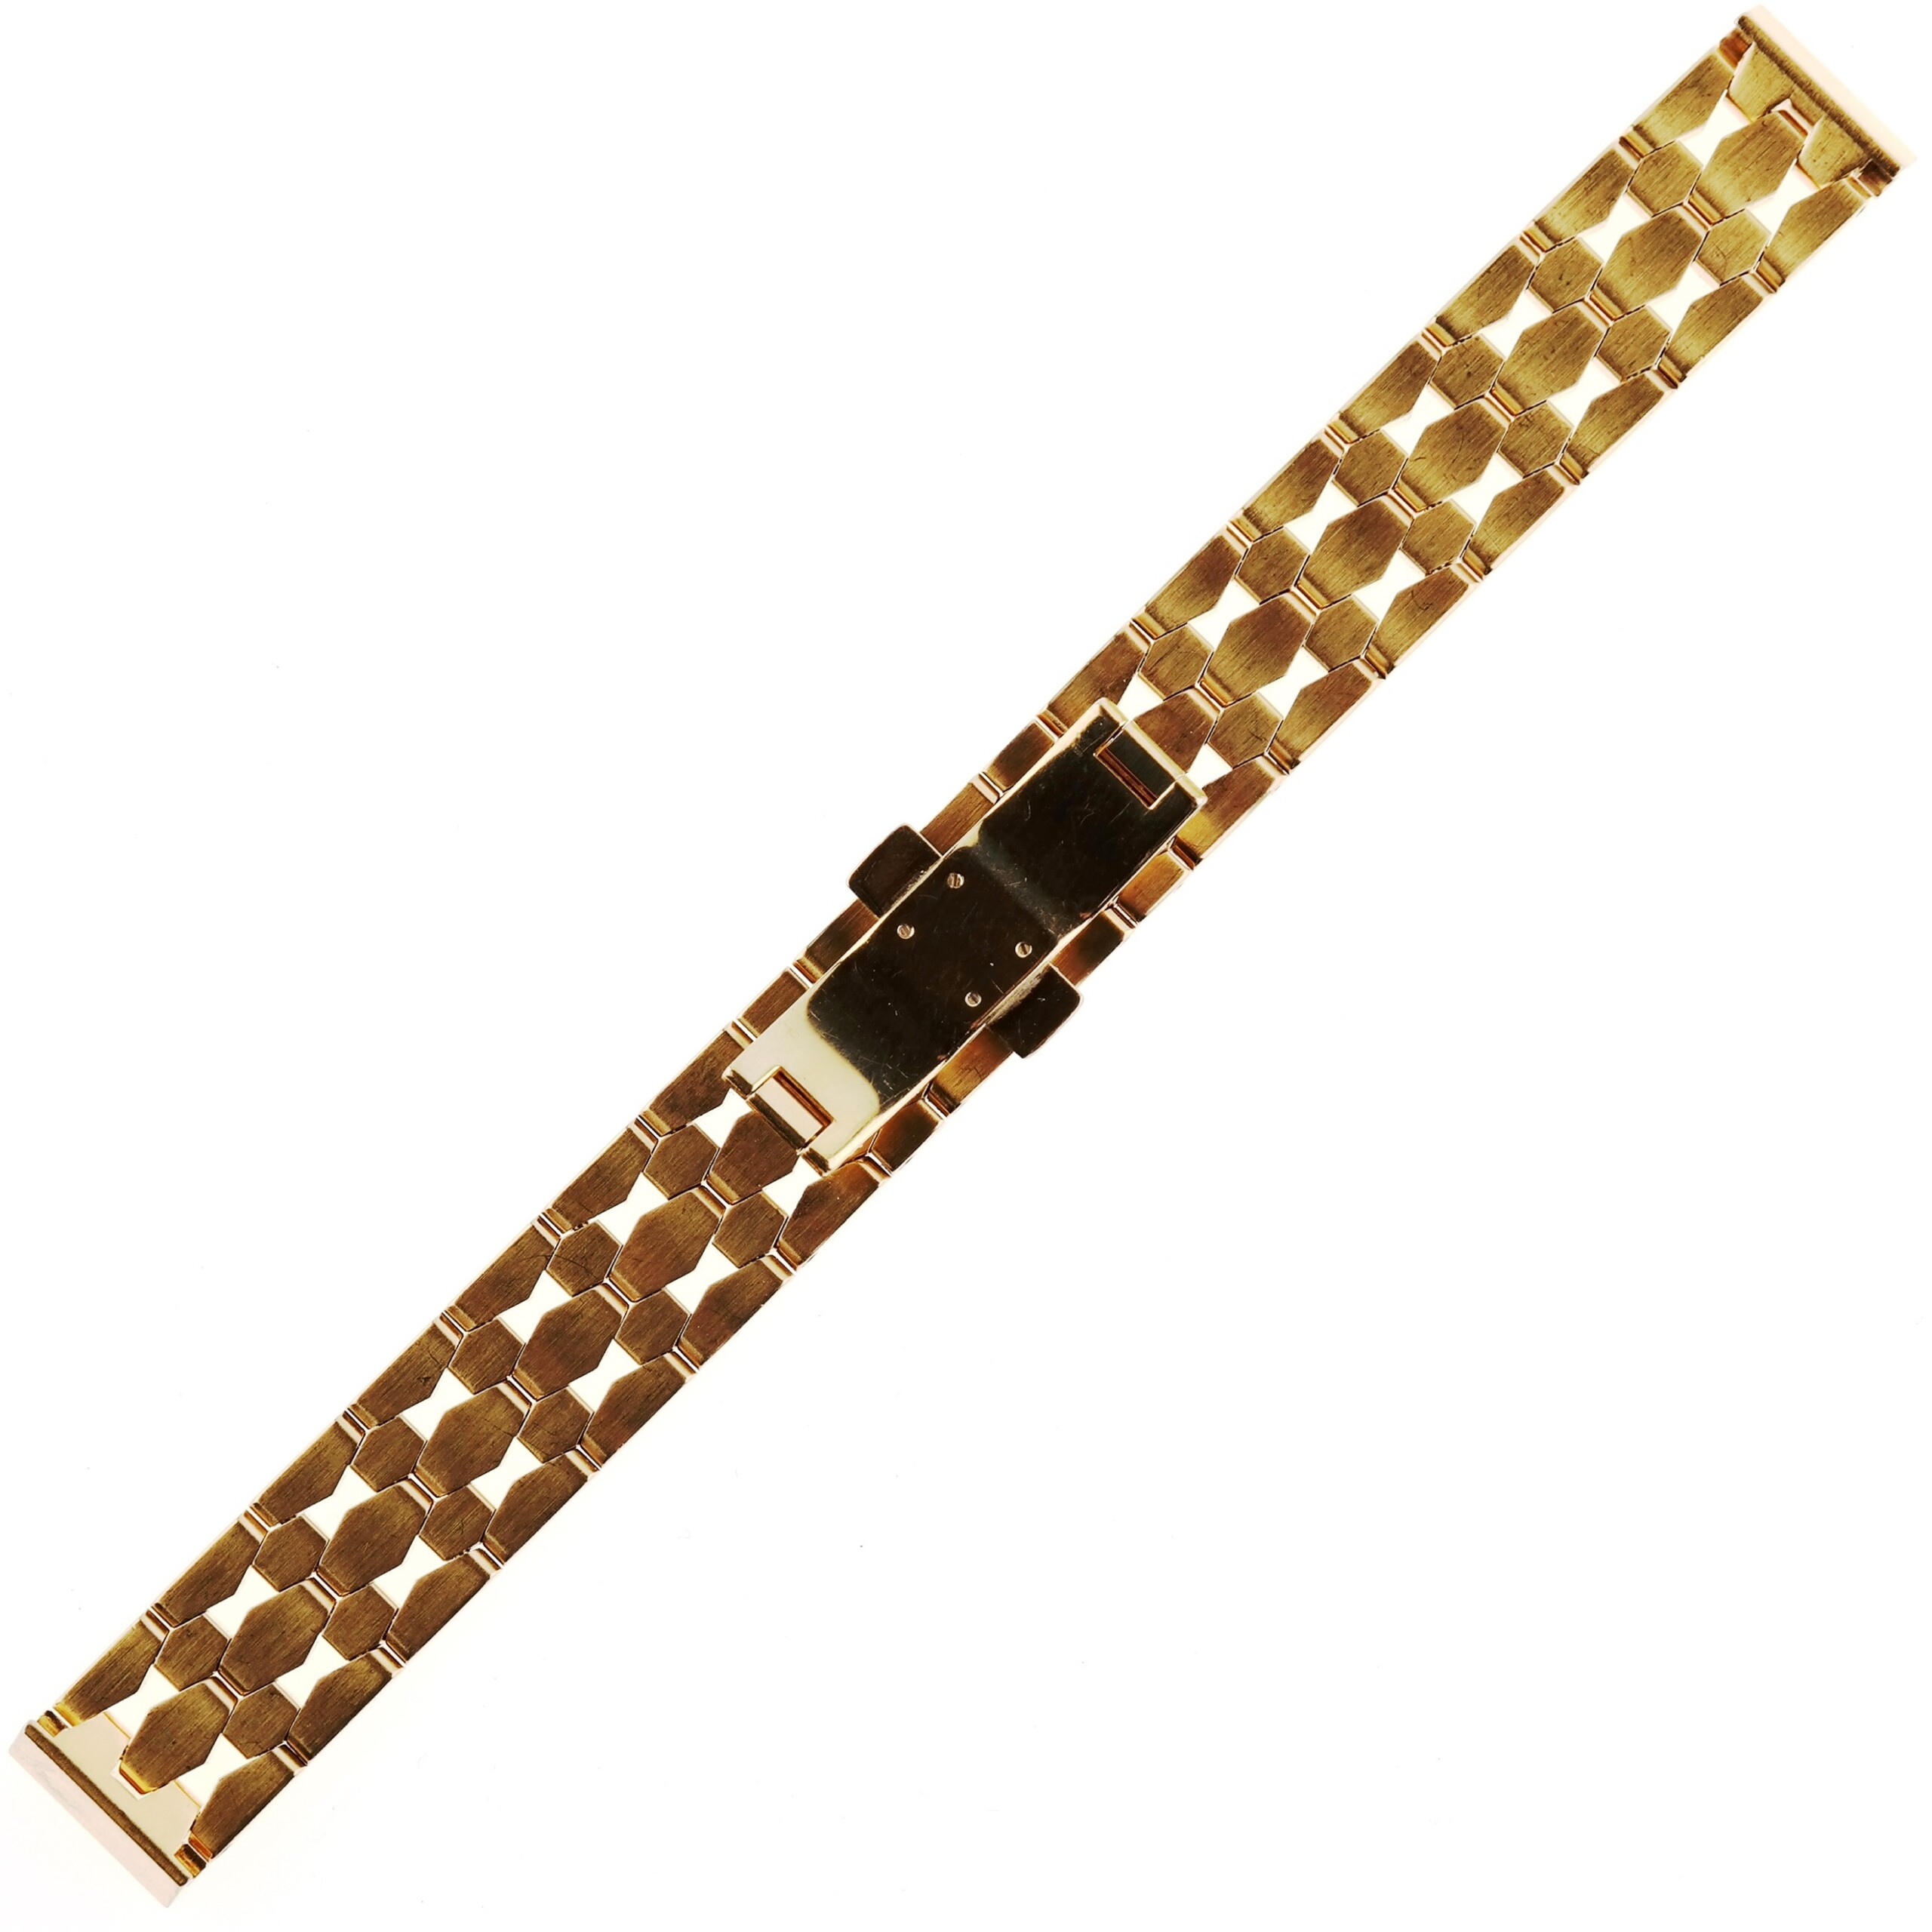 Authentic CORUM - Gold Plated Stainless Steel Watch Bracelet - 15 mm